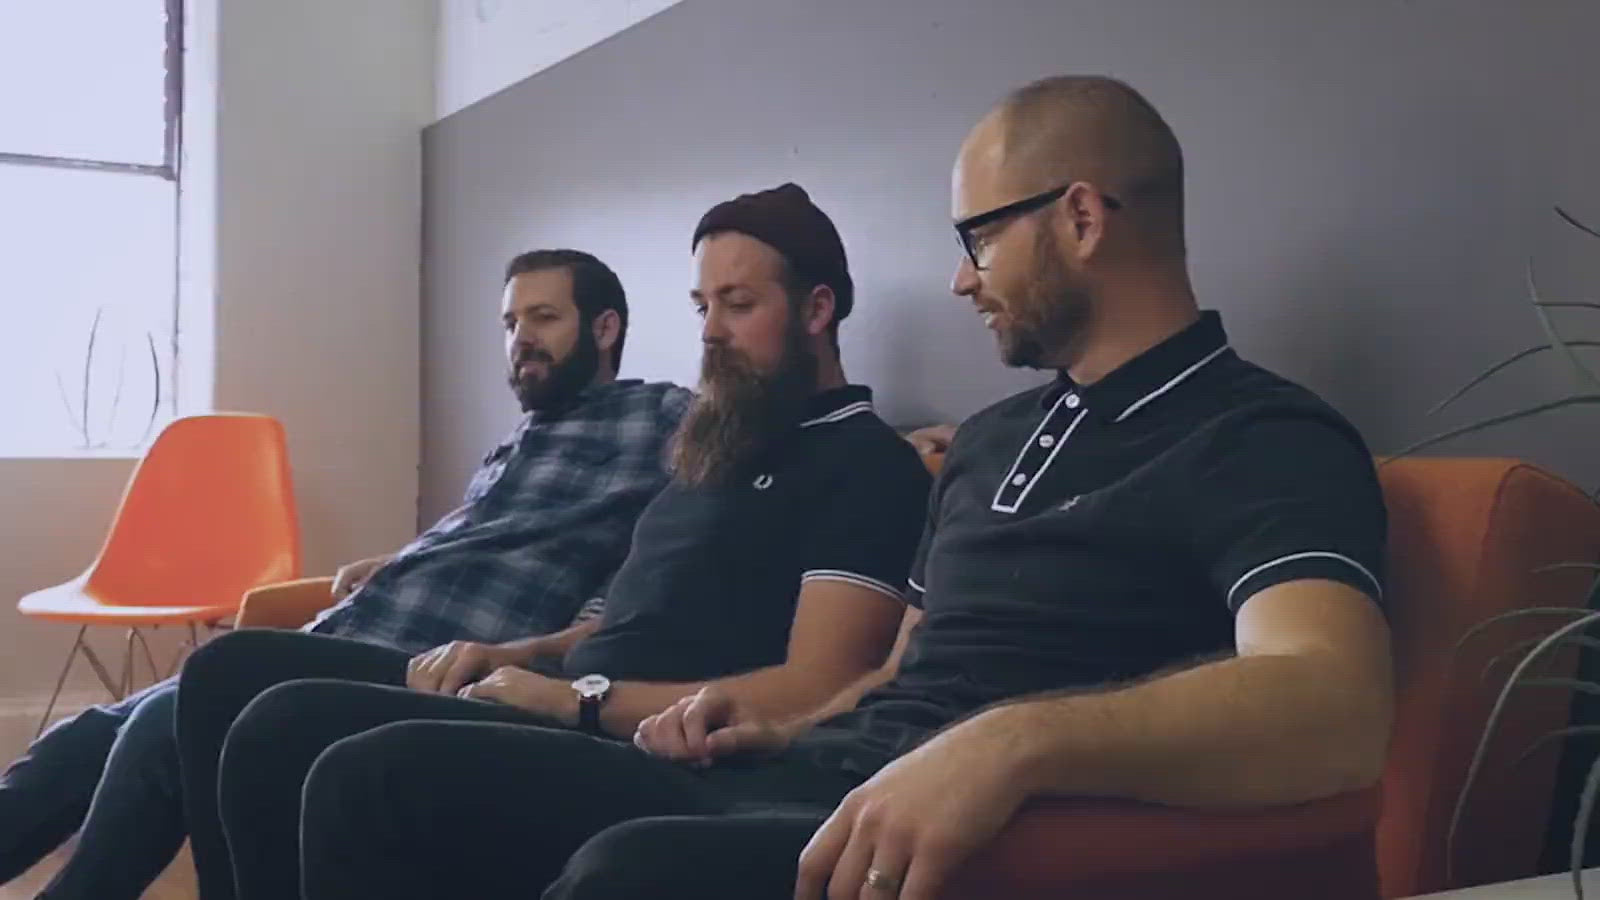 Load video: Several Vidlogix employees make room for their colleague on a sofa.